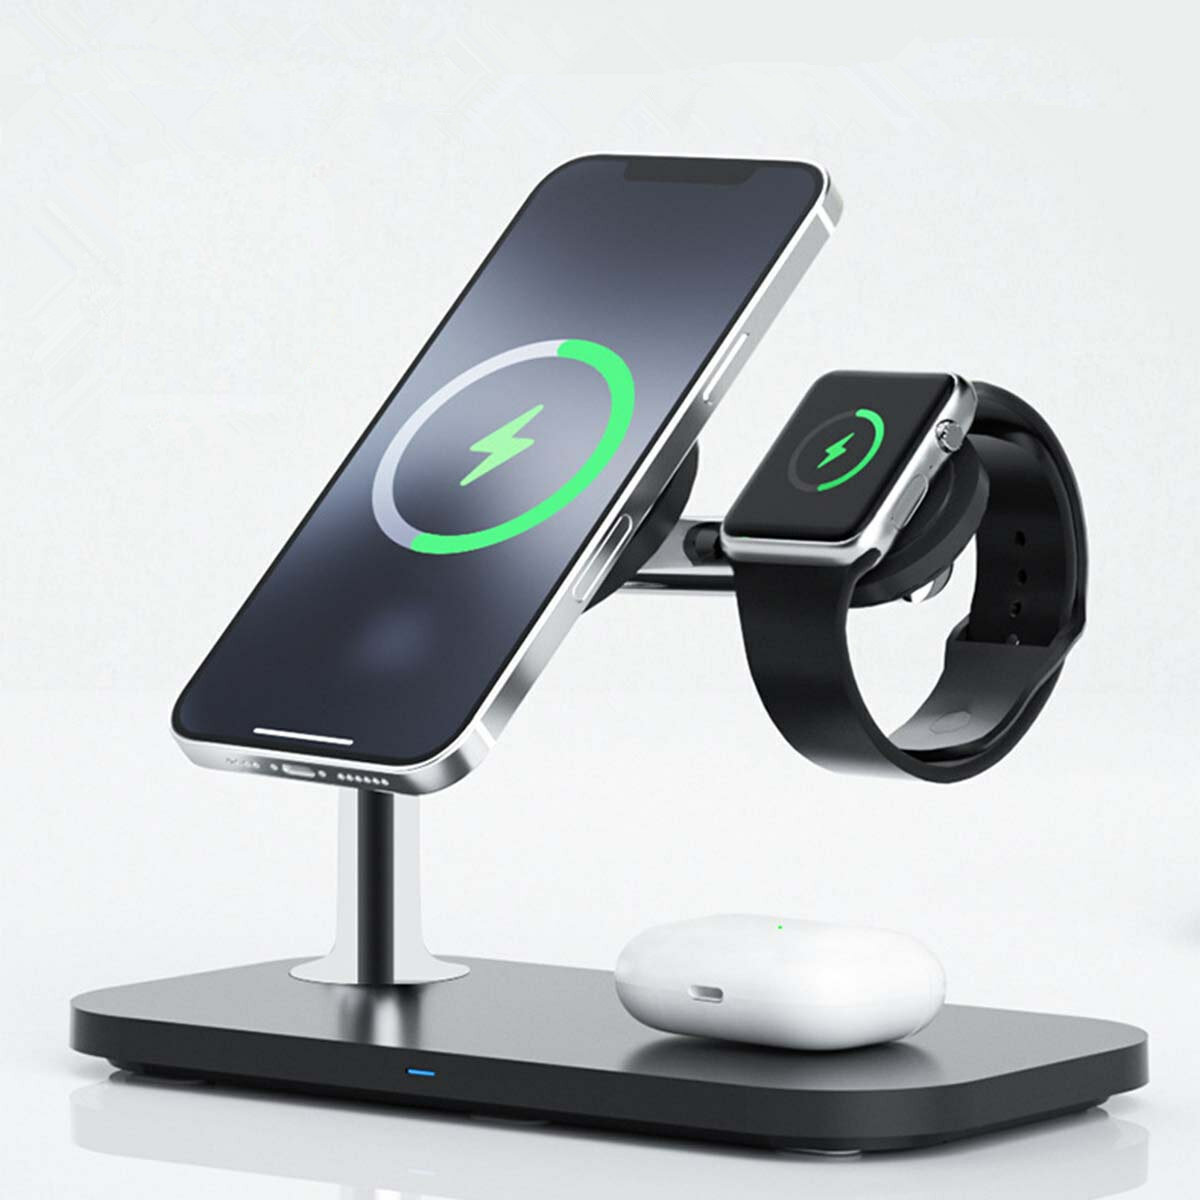 Bakeey 4 in 1 Magnetic Fast Wireless Charger Stand Holder with Lamp for iPhone 13 12 Pro Max